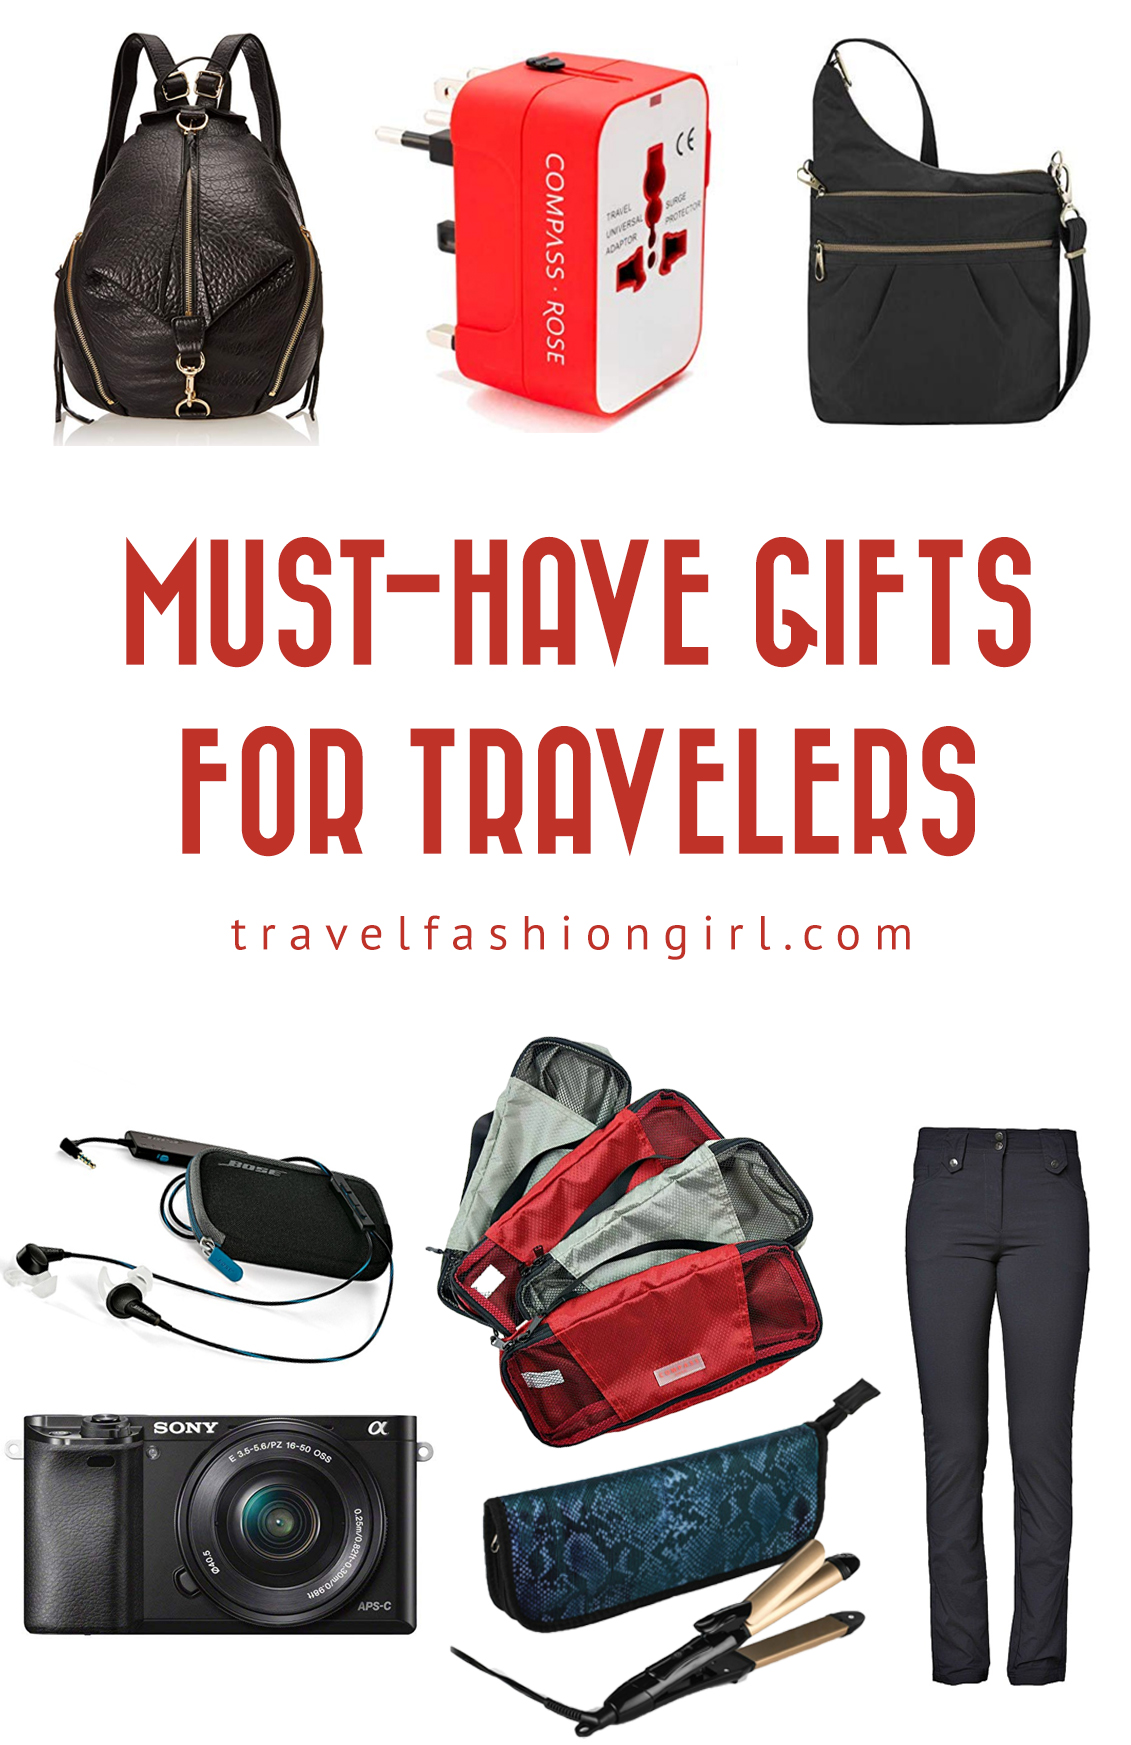 These are Great Gifts for Travelers that Are Always on the Go